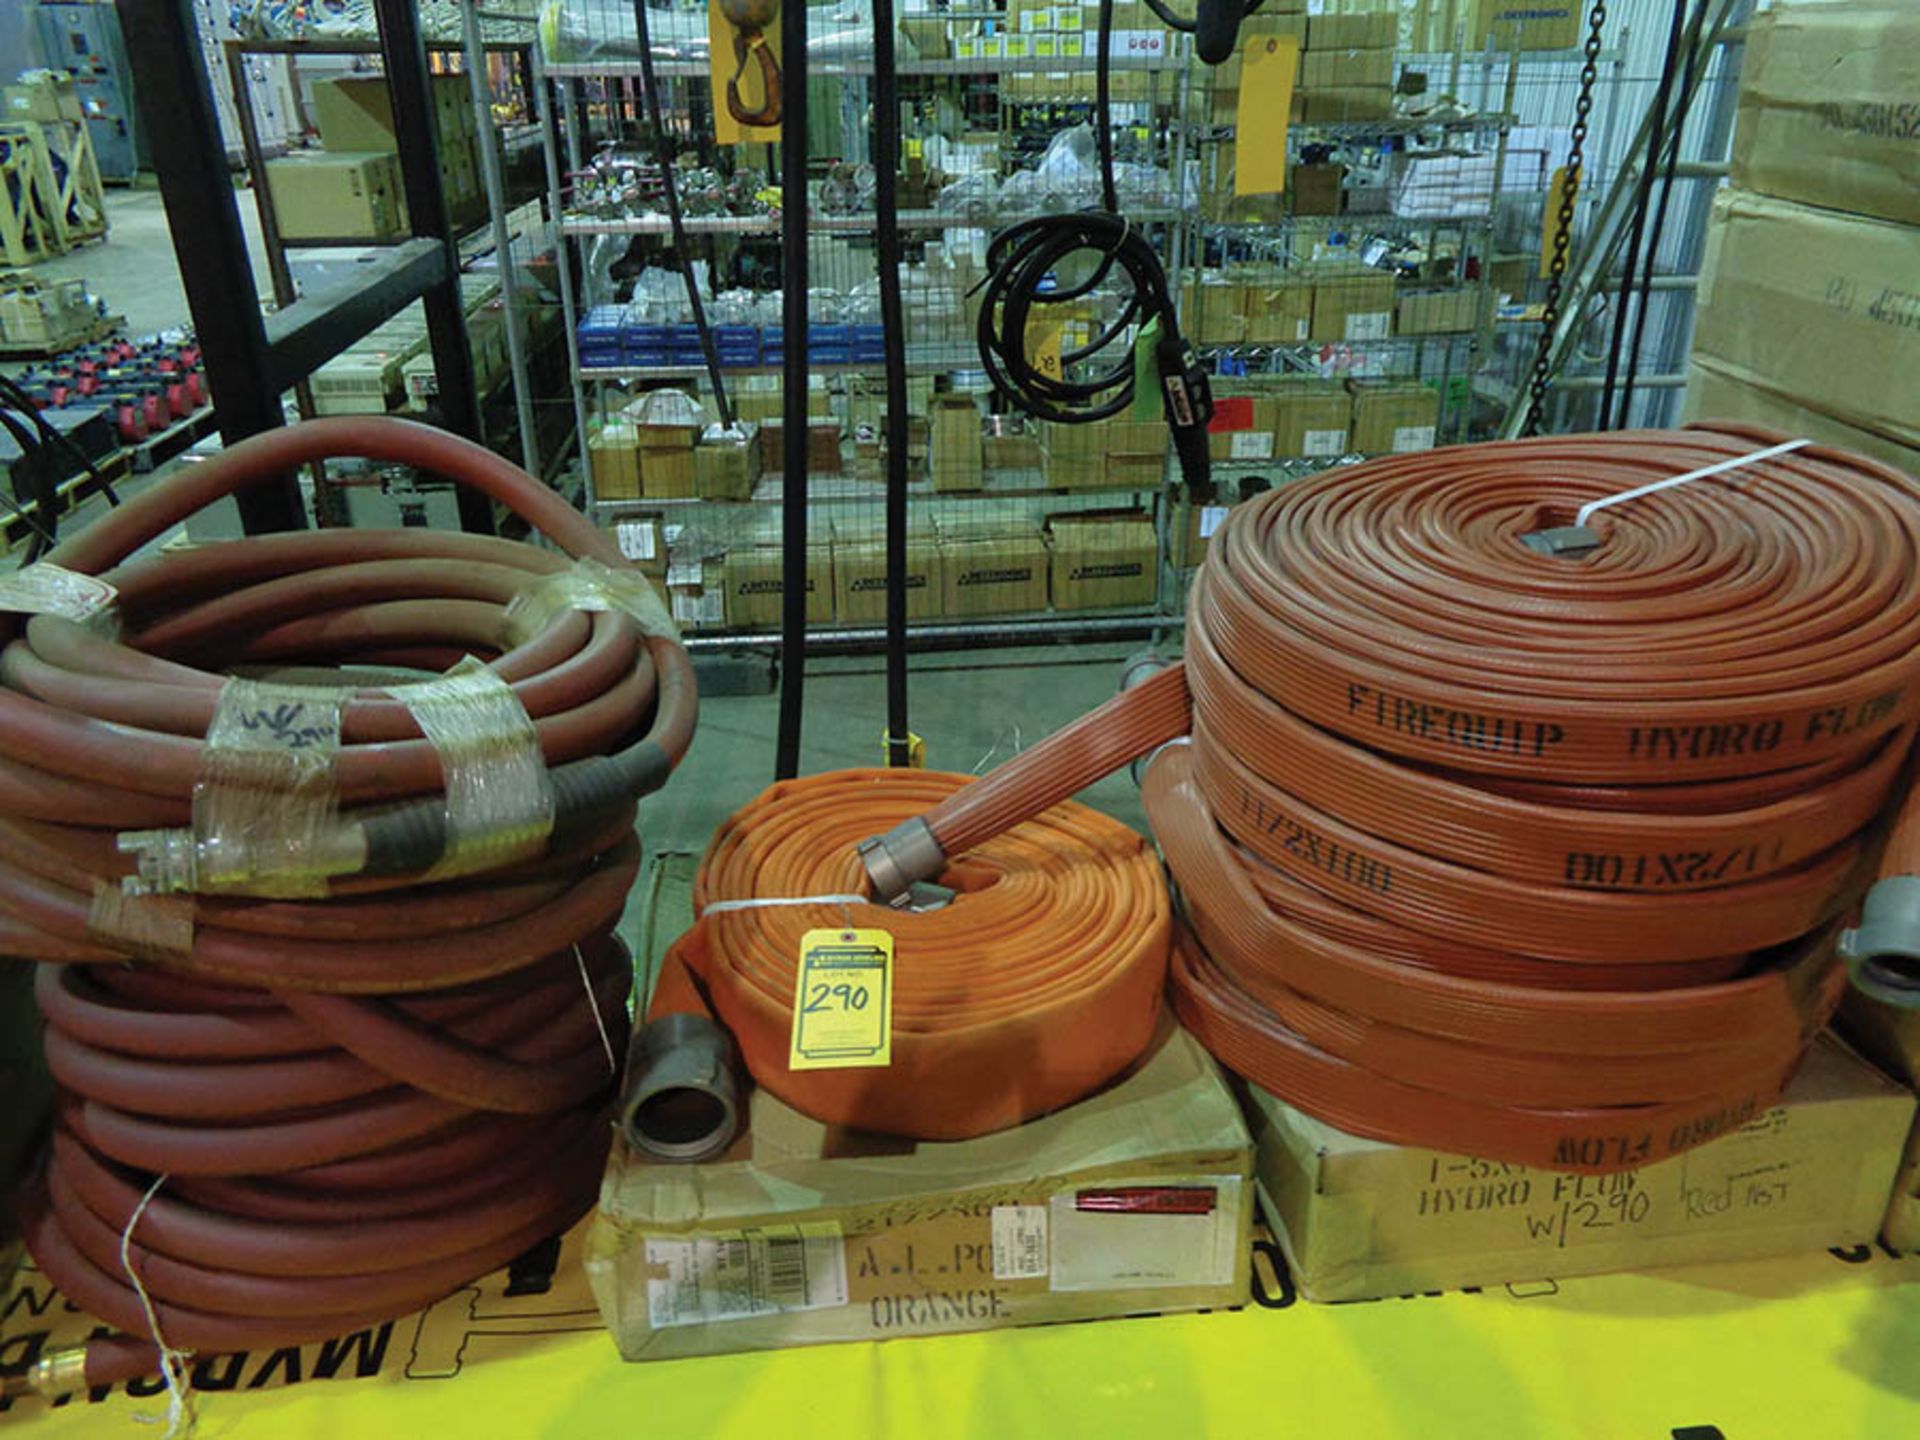 MISC. LOT OF FIRE HOSE